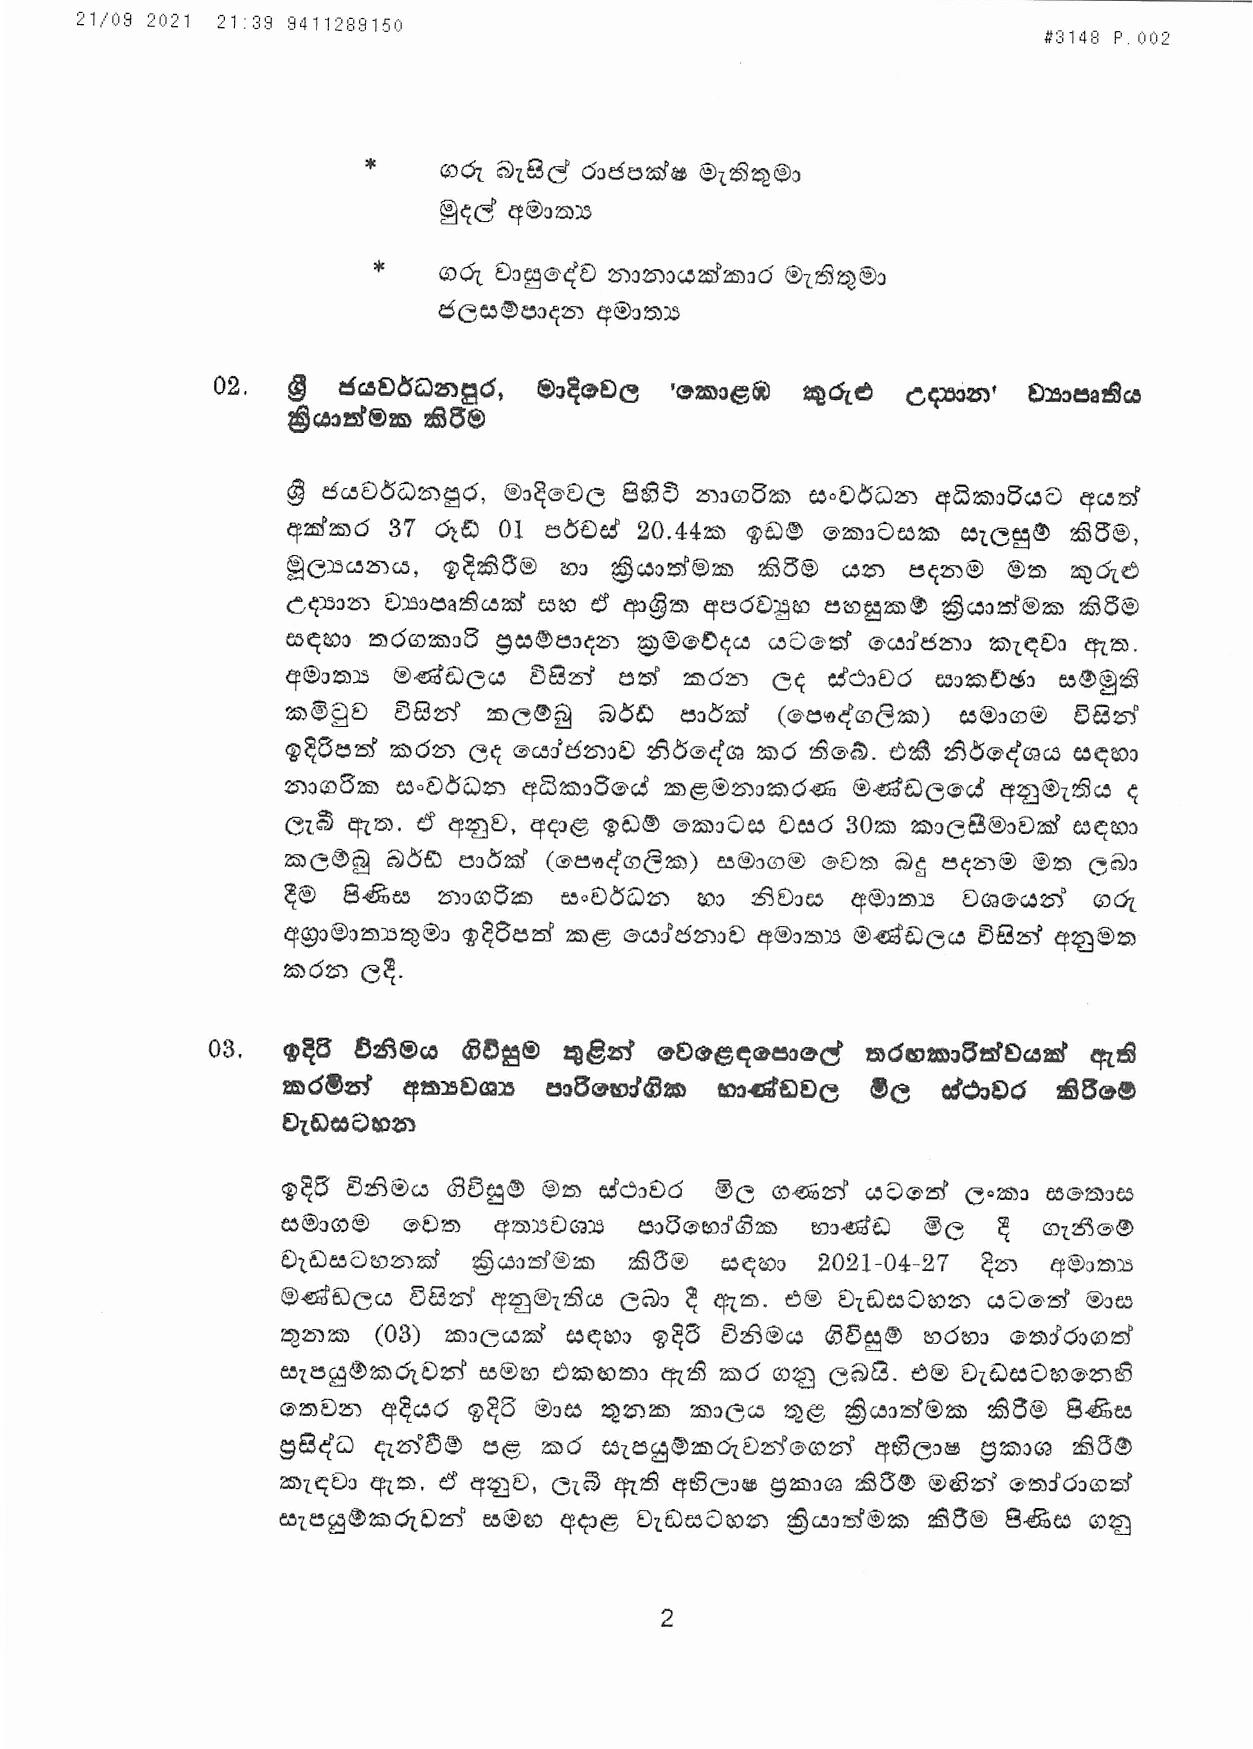 Cabinet Decisions on 21.09.2021 page 002